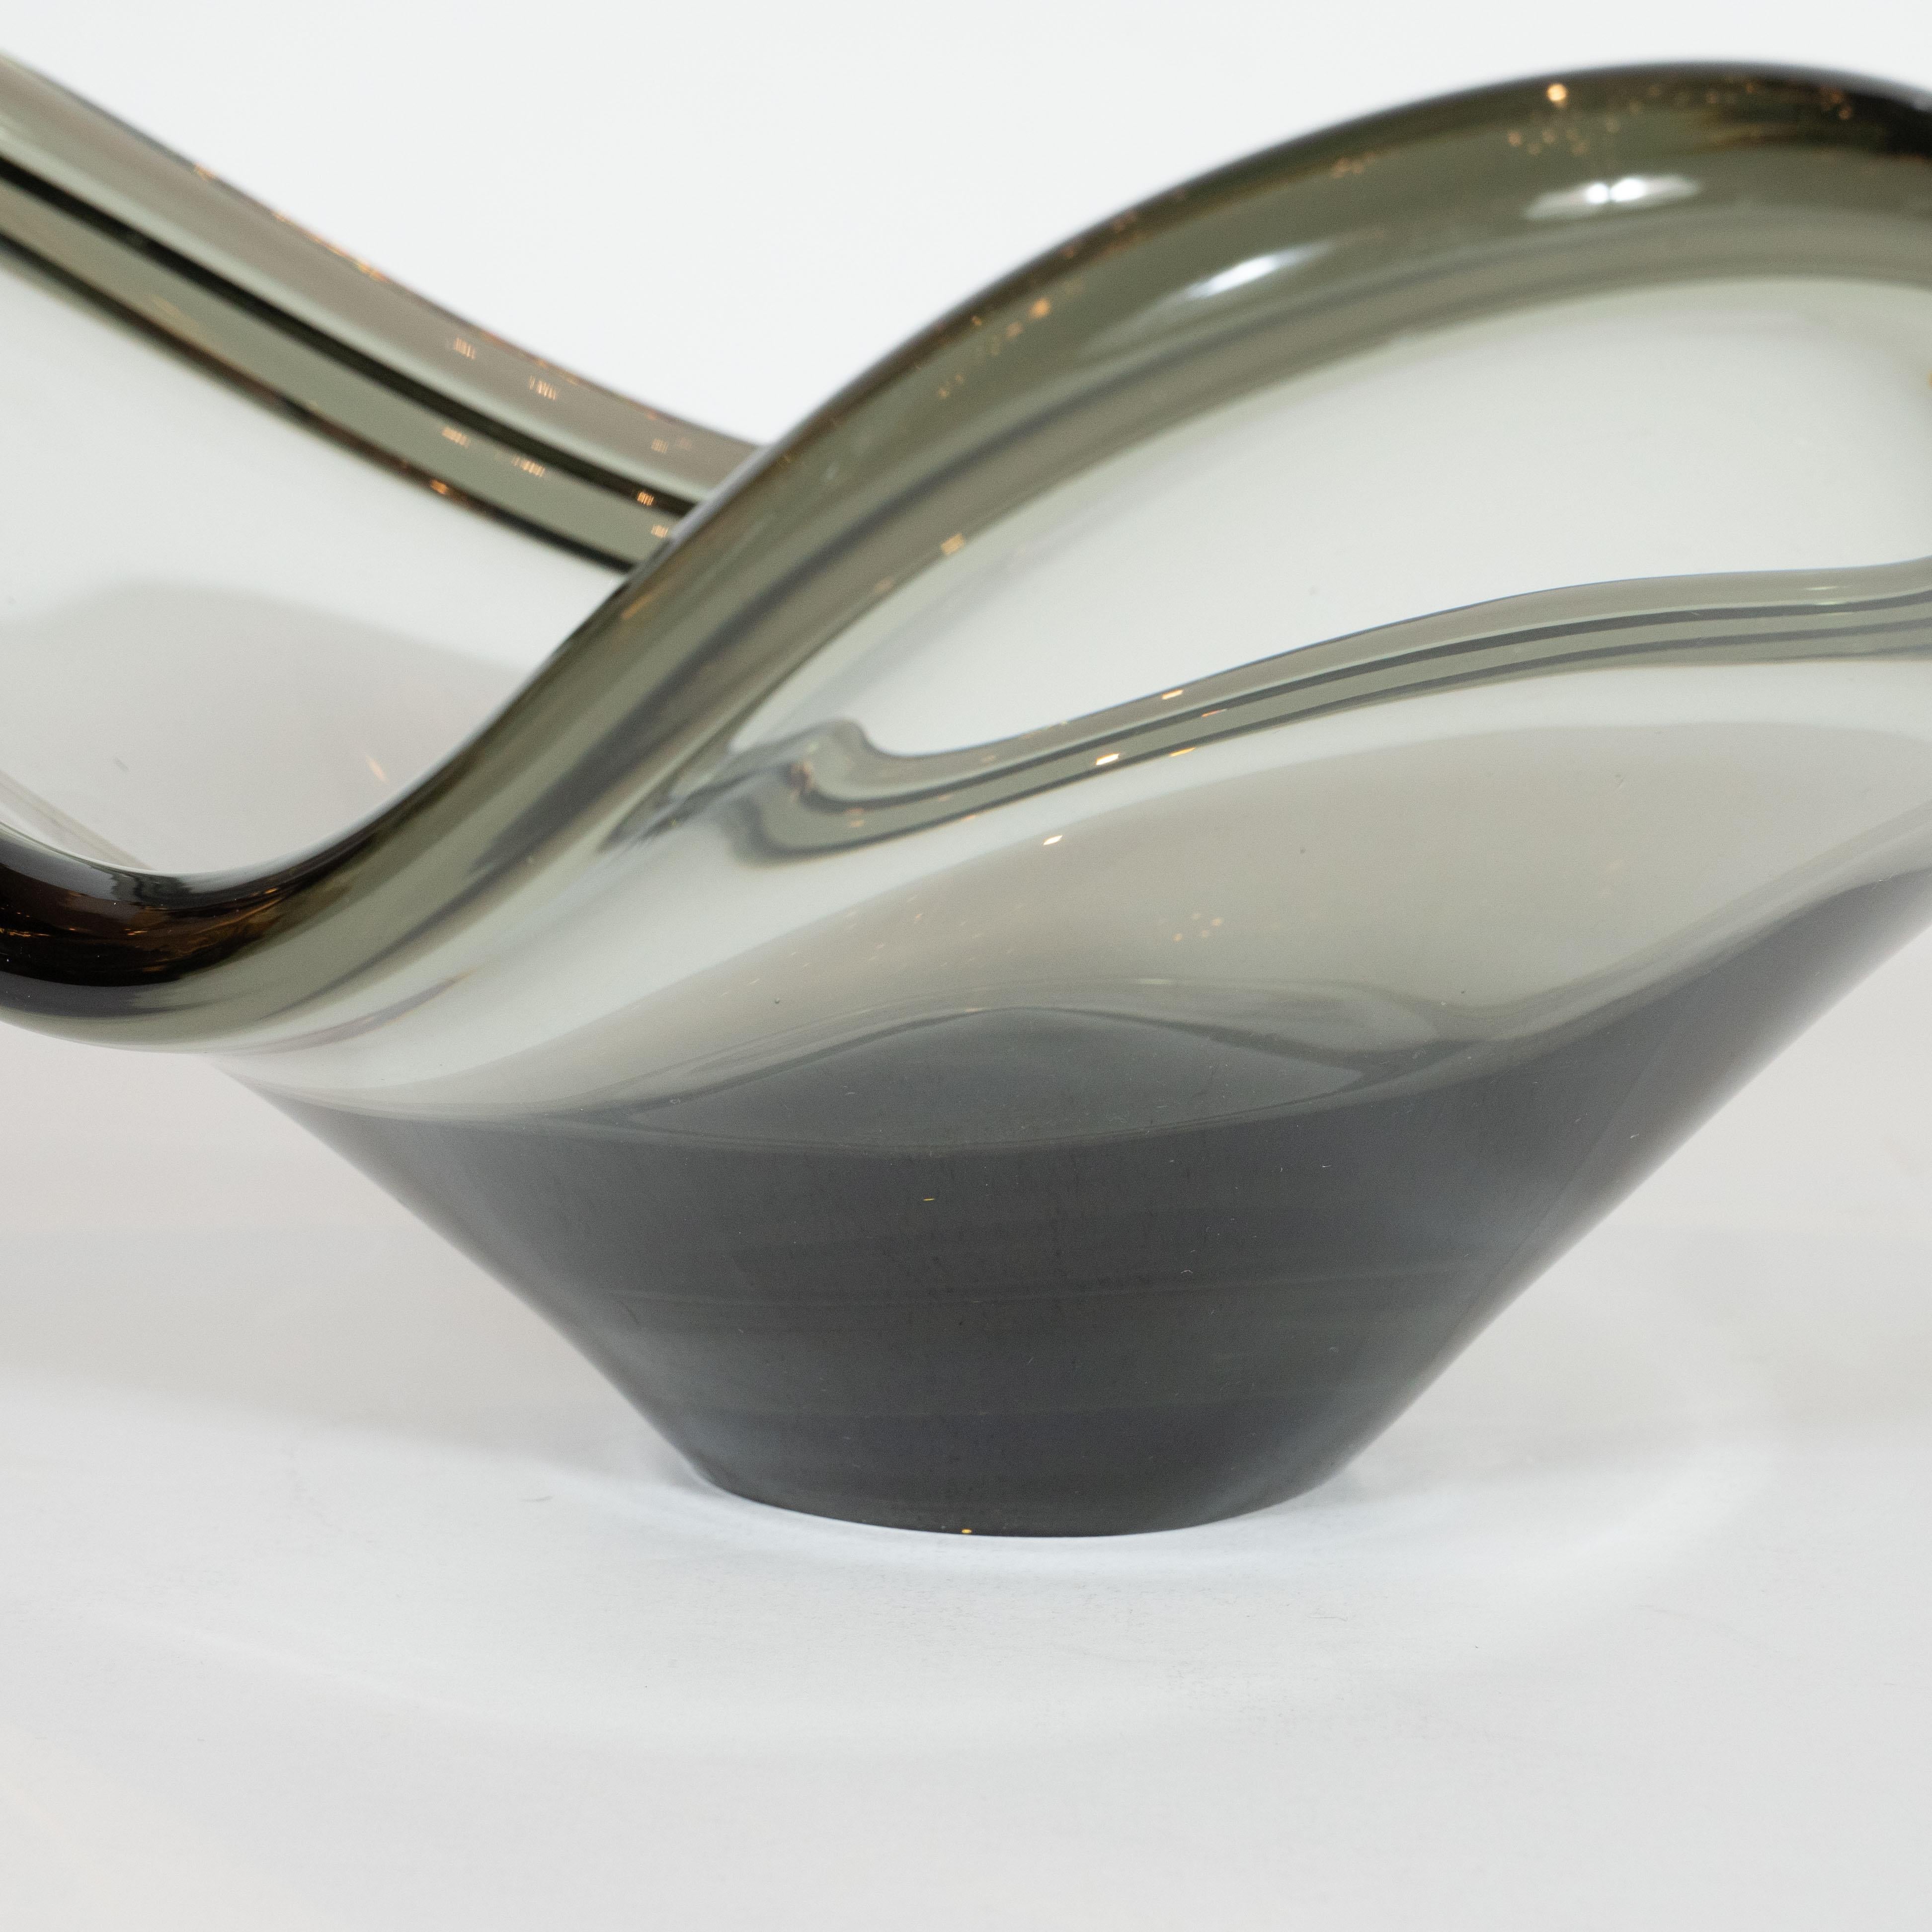 This refined and sculptural Mid-Century Modern bowl was hand blown by the celebrated Swedish maker Holmgaard in 1960. It features a sculptural three sided atomic form with undulating sides and a subtly raised lip all realized in a translucent smoked